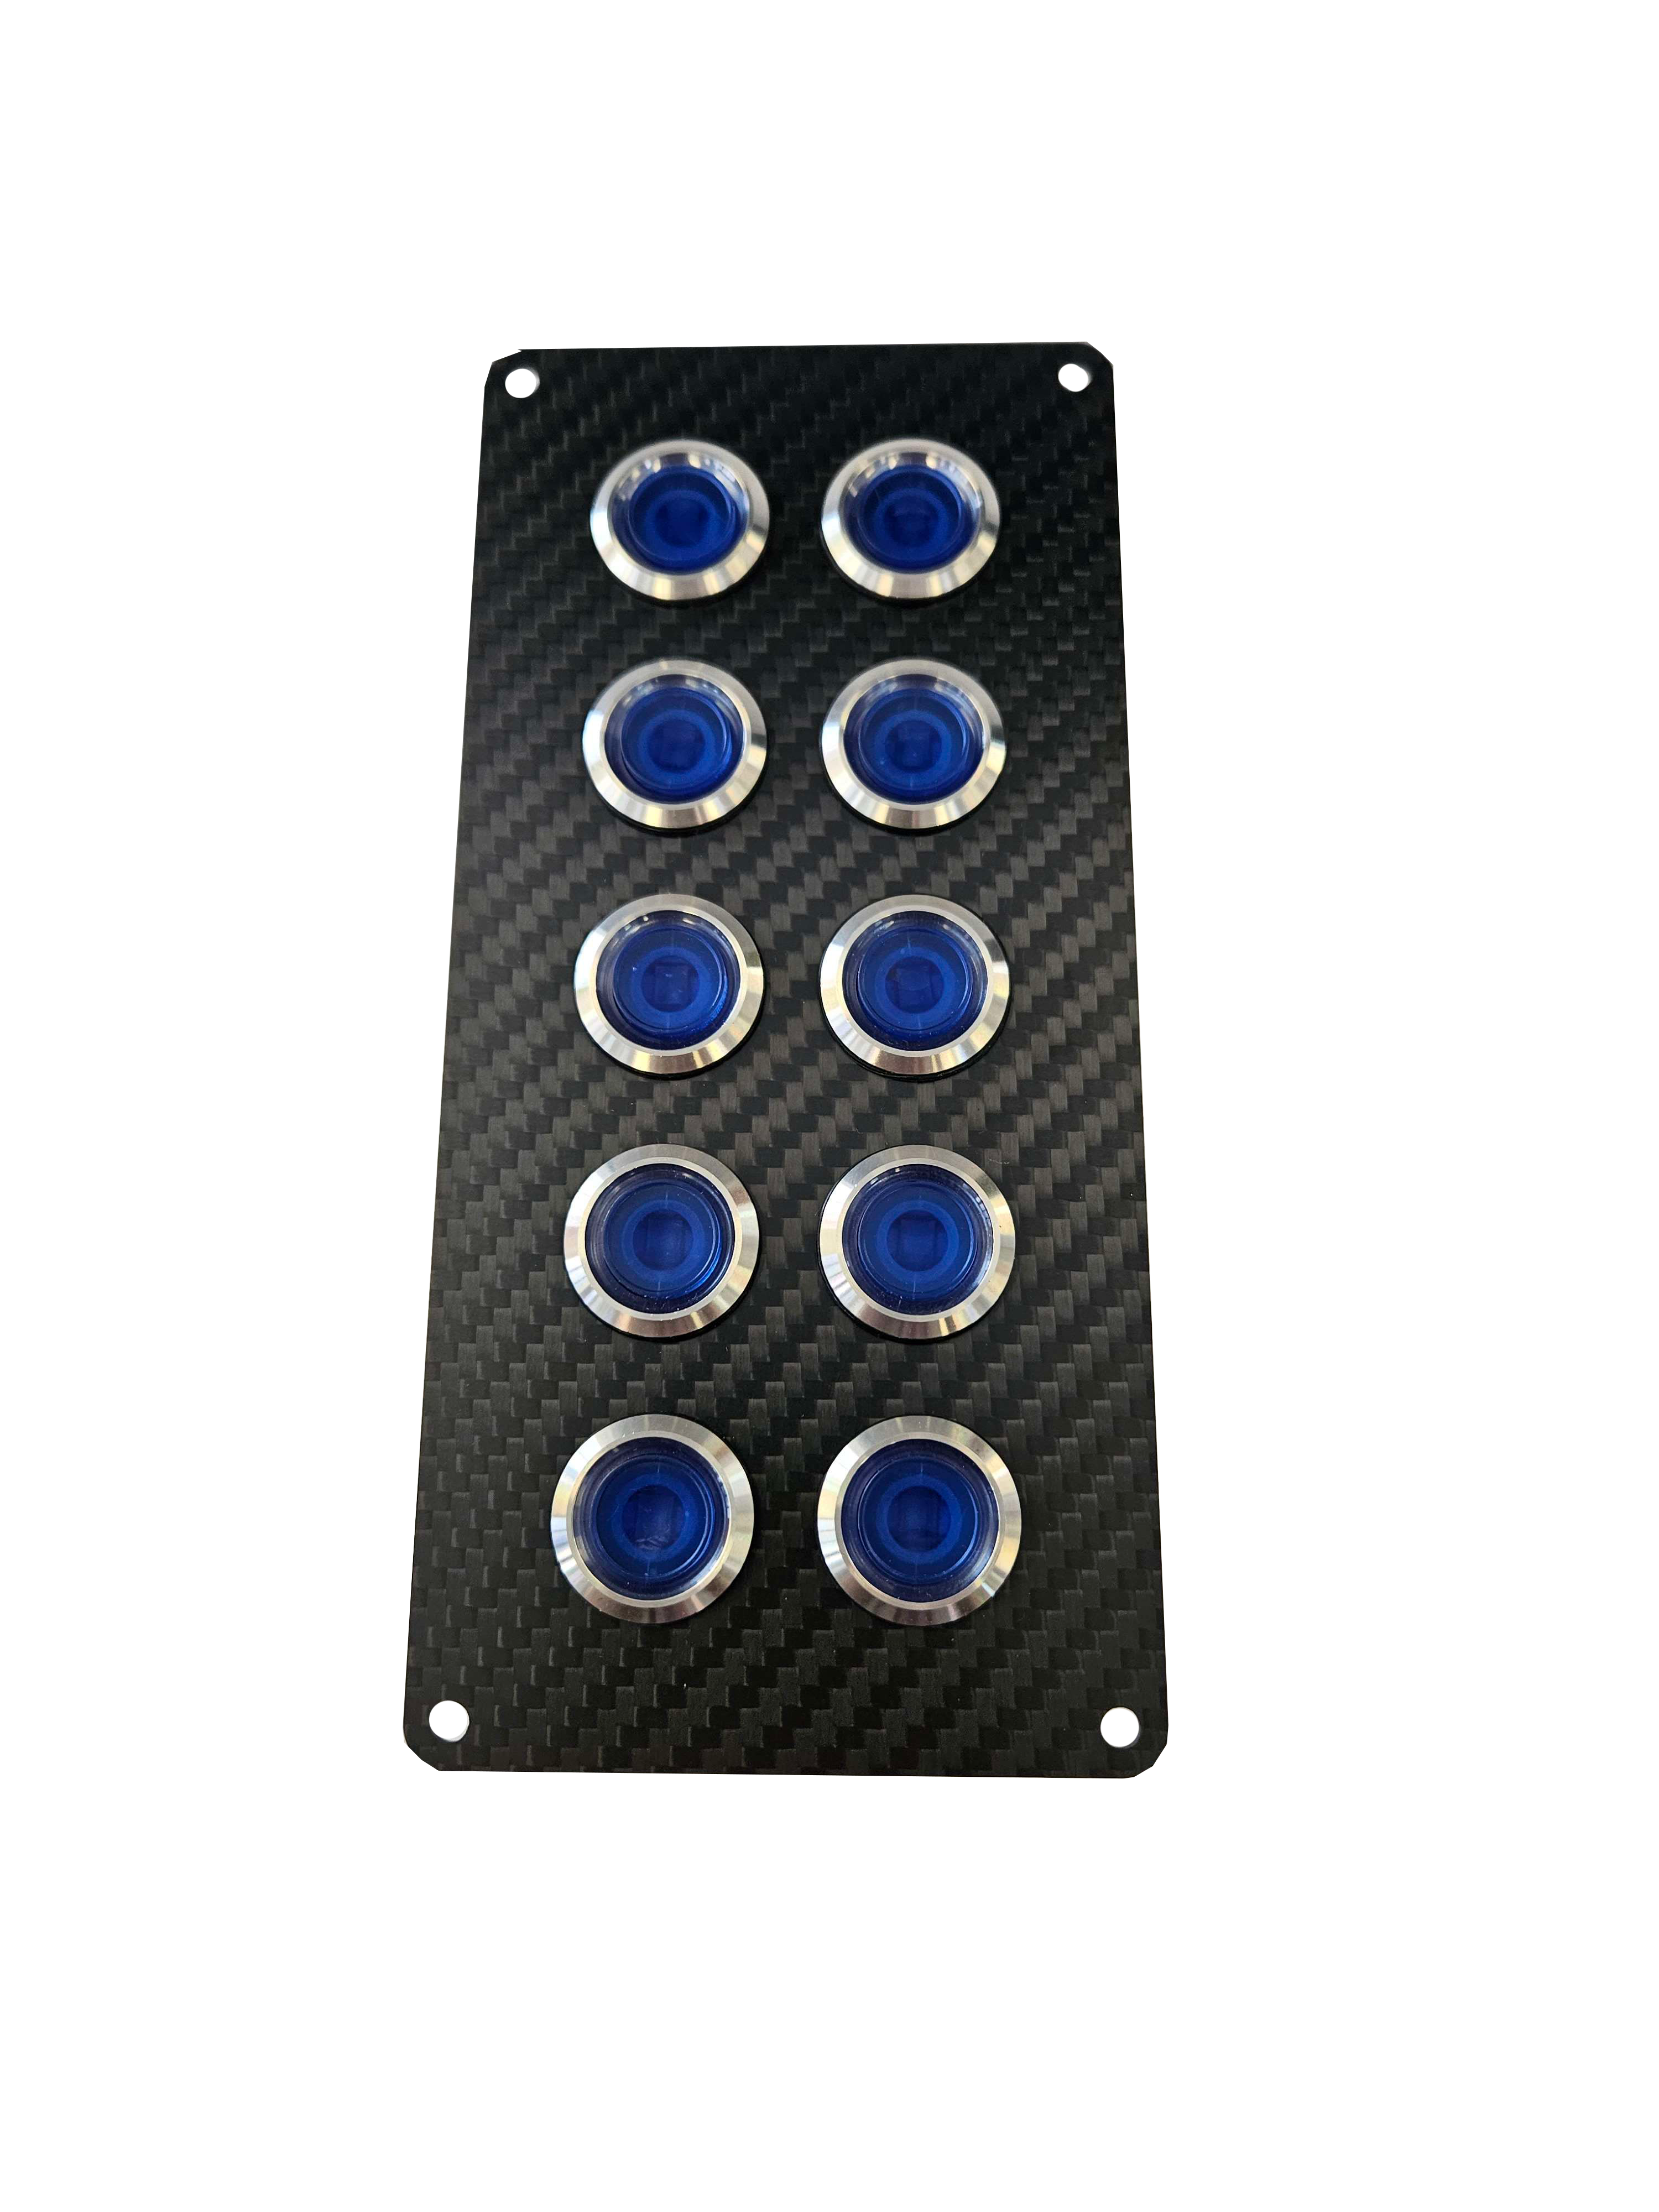 10 gang carbon fibre switch panel with 15A backlit switches